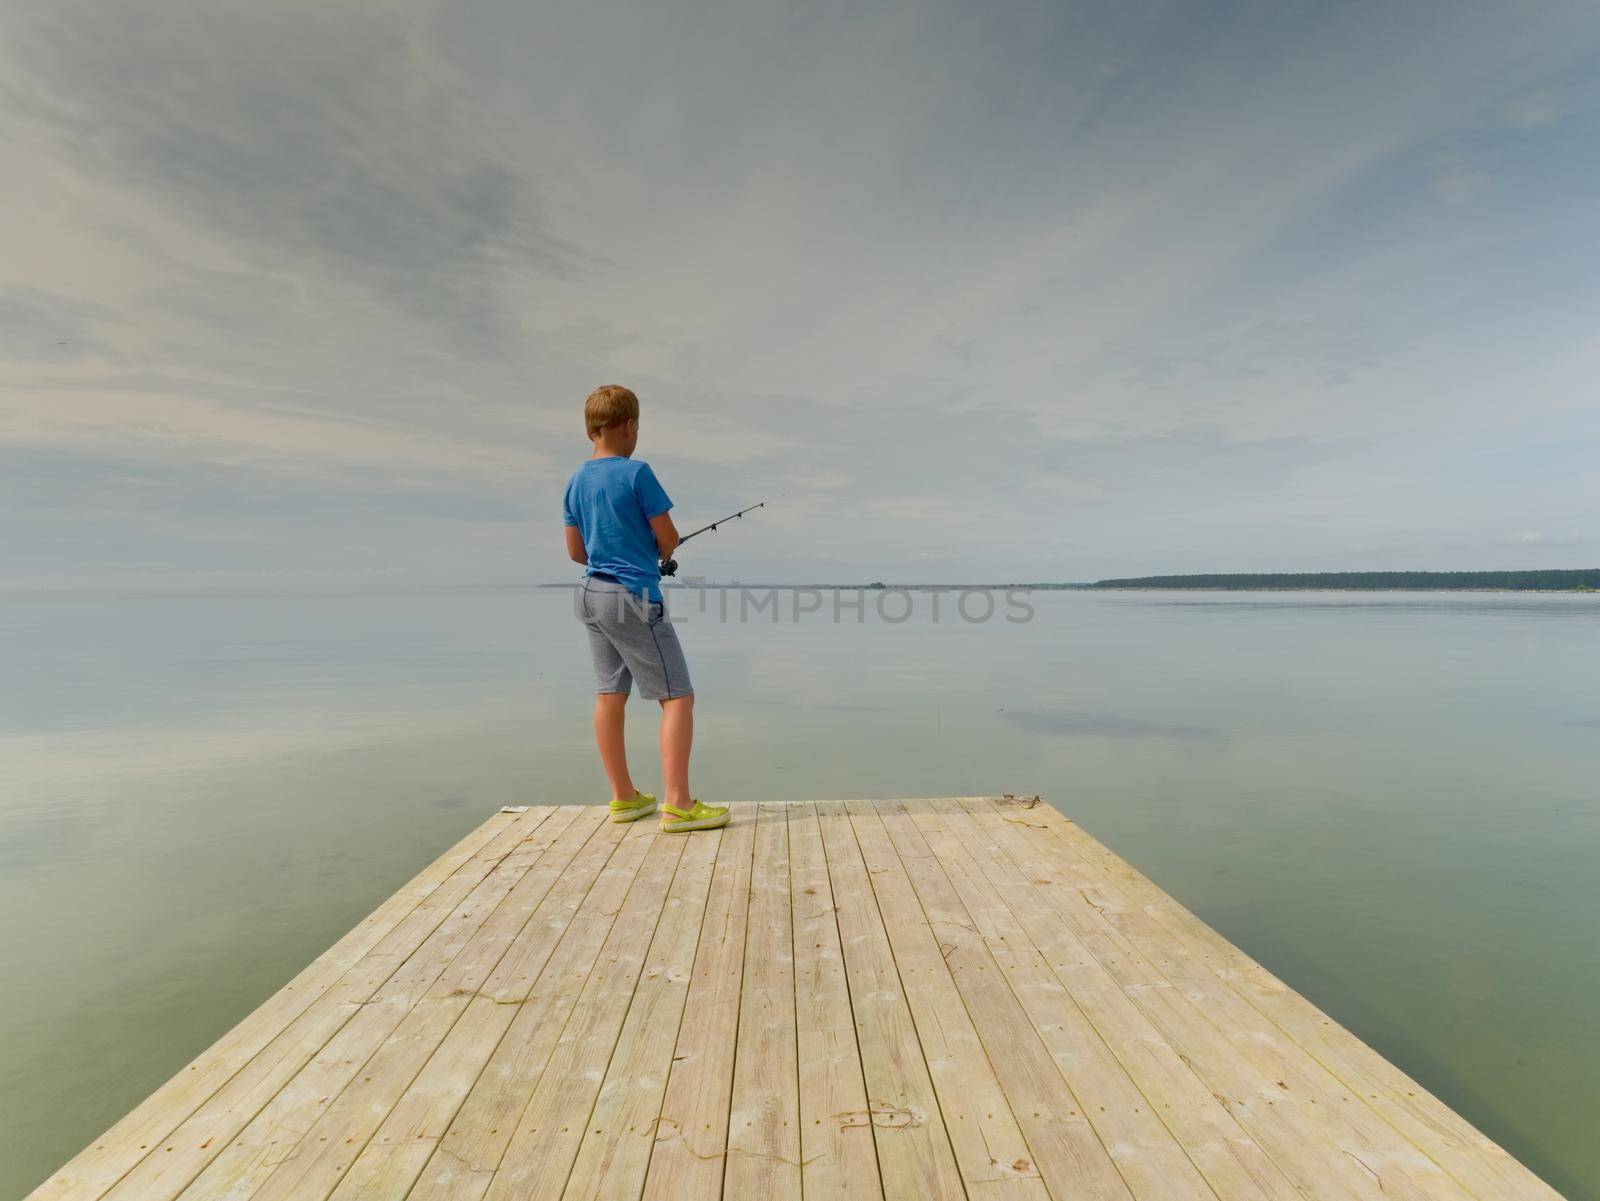 Small blond hair boy is fishing at the end of wooden mole. Smooth water level in bay, clear sky. Kid in blue t-shirt, grey striped shorts and green flip-flops